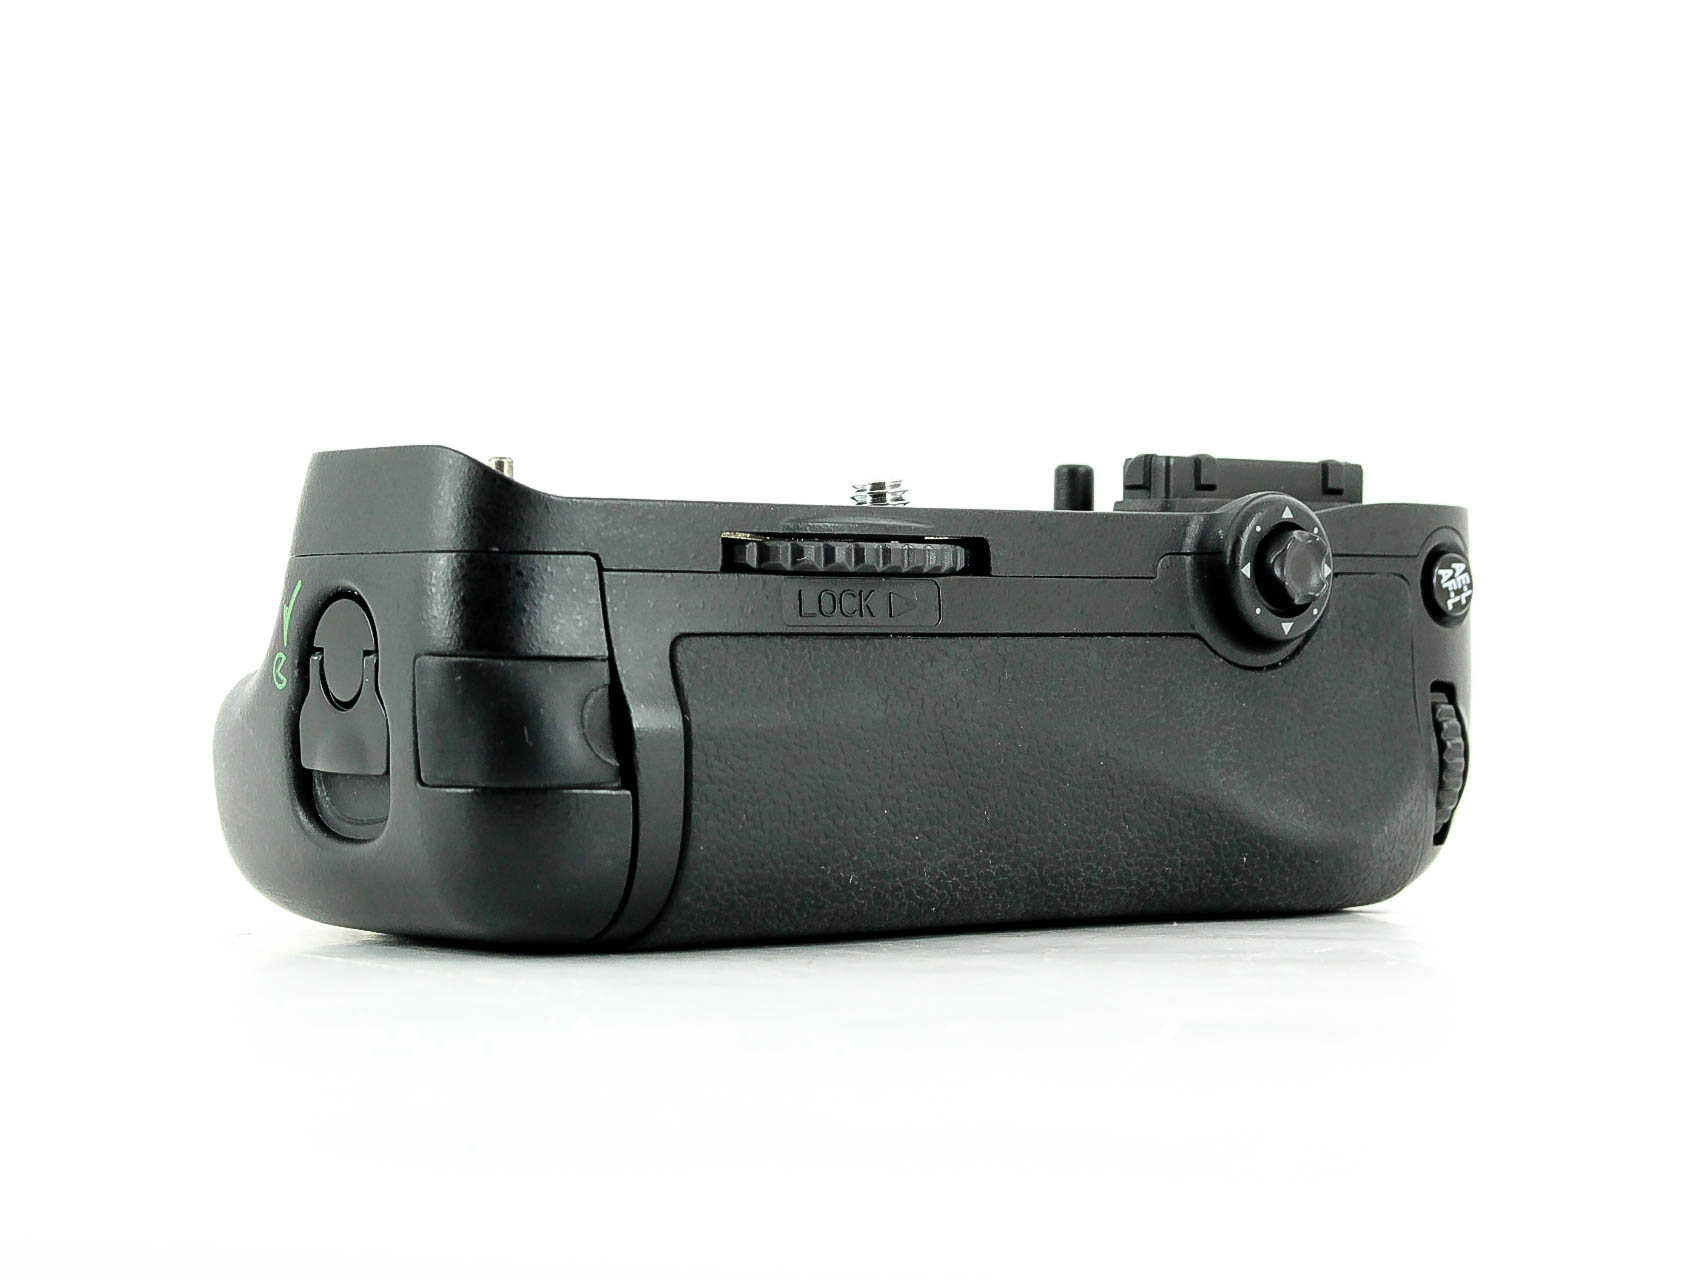 Newmowa MB-D14 Replacement Vertical Battery Grip for Nikon D600 D610 Digital SLR Camera with IR Remote Function 